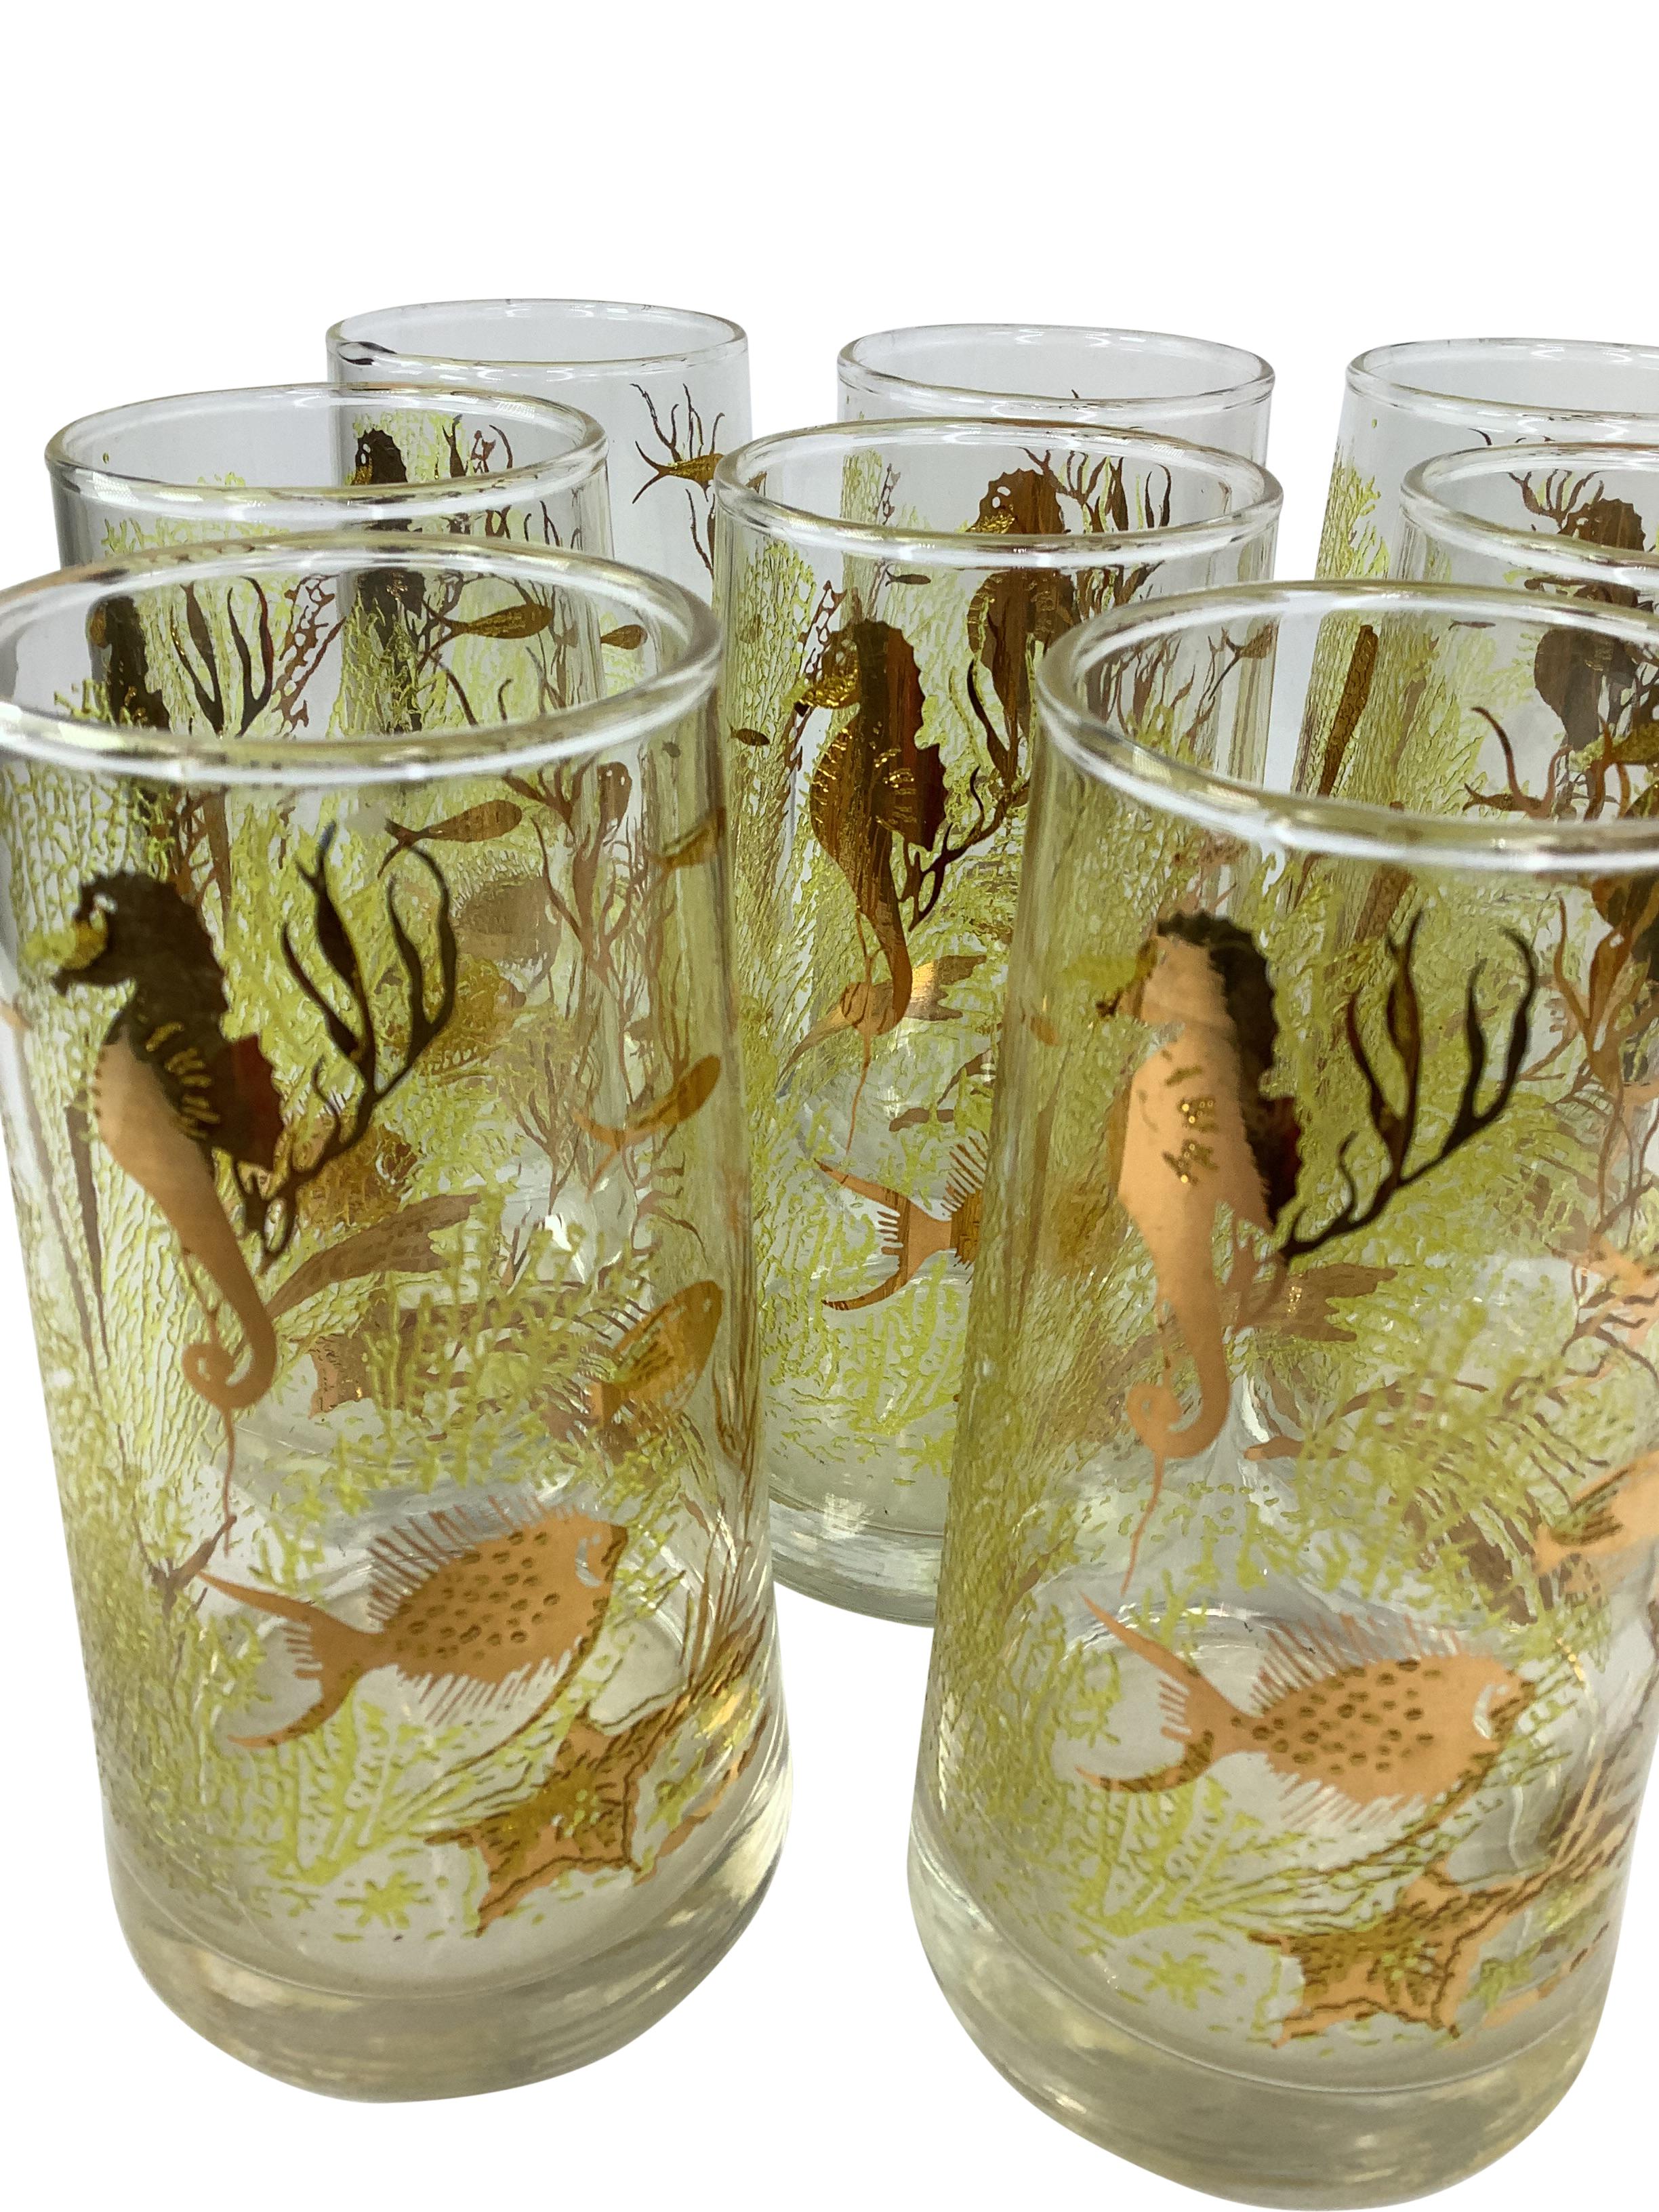 Set of 8 Vintage Libbey Sea Life Tumblers with raised green design and Gilt Seahorses and Fish in an Underwater Ocean Scene. Glasses are tapered, measuring 2 1/4